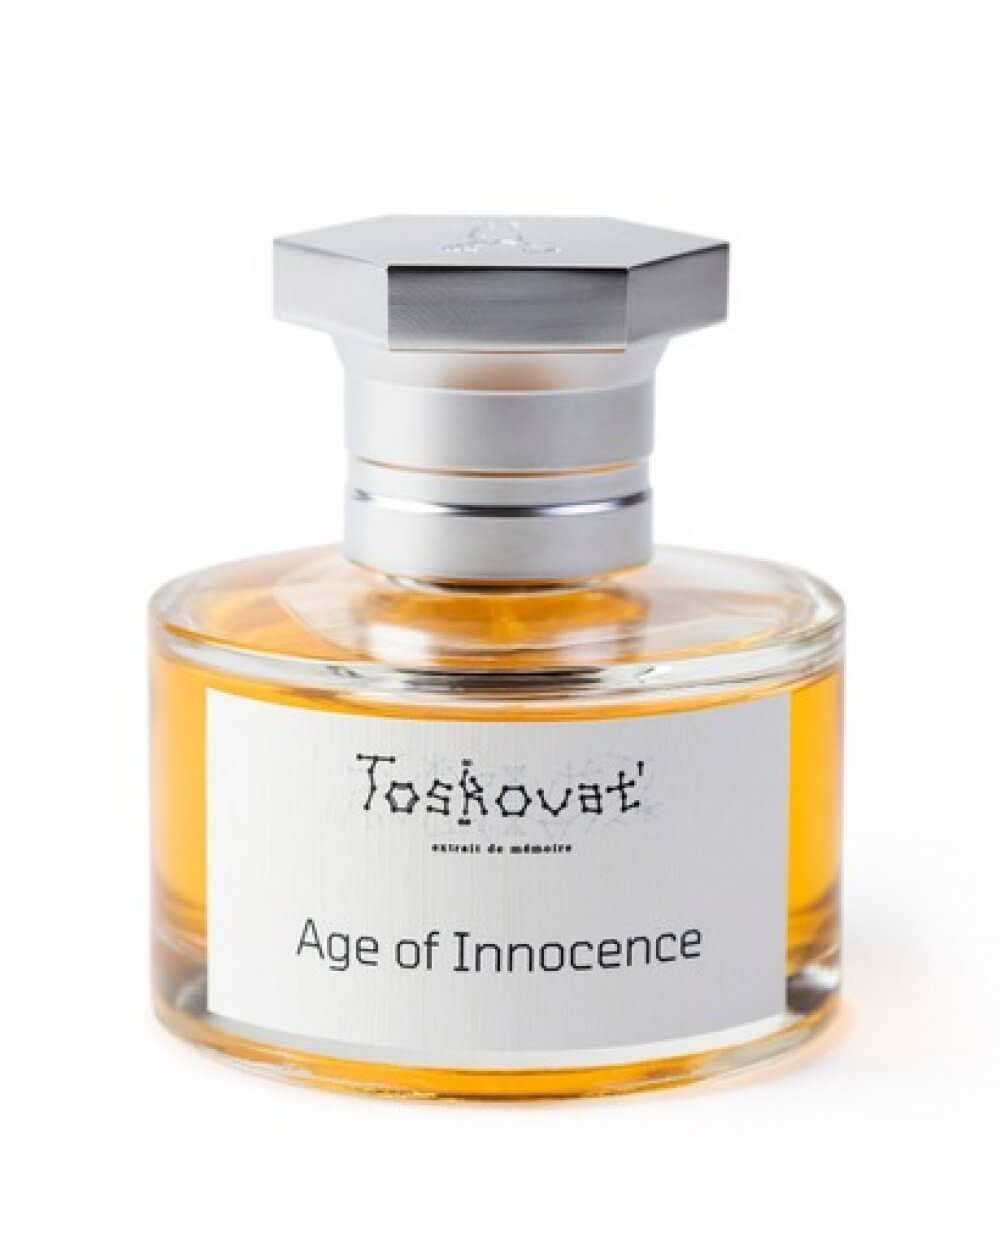 the age of innocence (1993) Toskovat Age of Innocence 60 ML Extract de Parfum